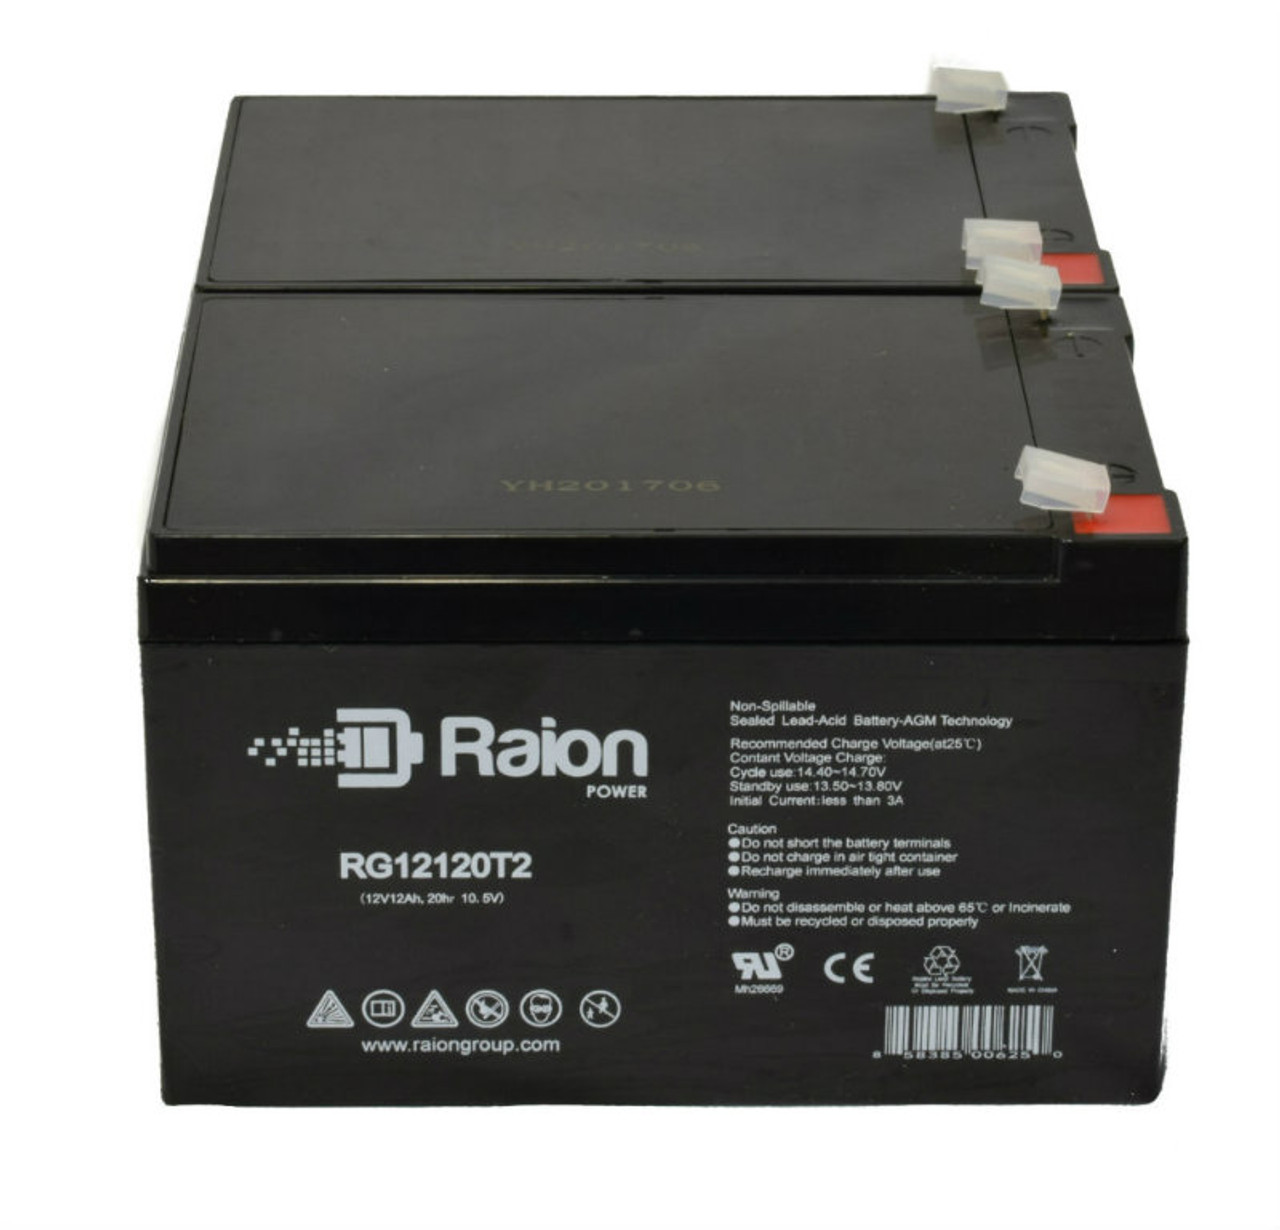 Raion Power RG12120T2 Replacement Battery Set for Pride Mobility Go-Go Elite Traveller - 4 Mobility Scooter - 2 Pack